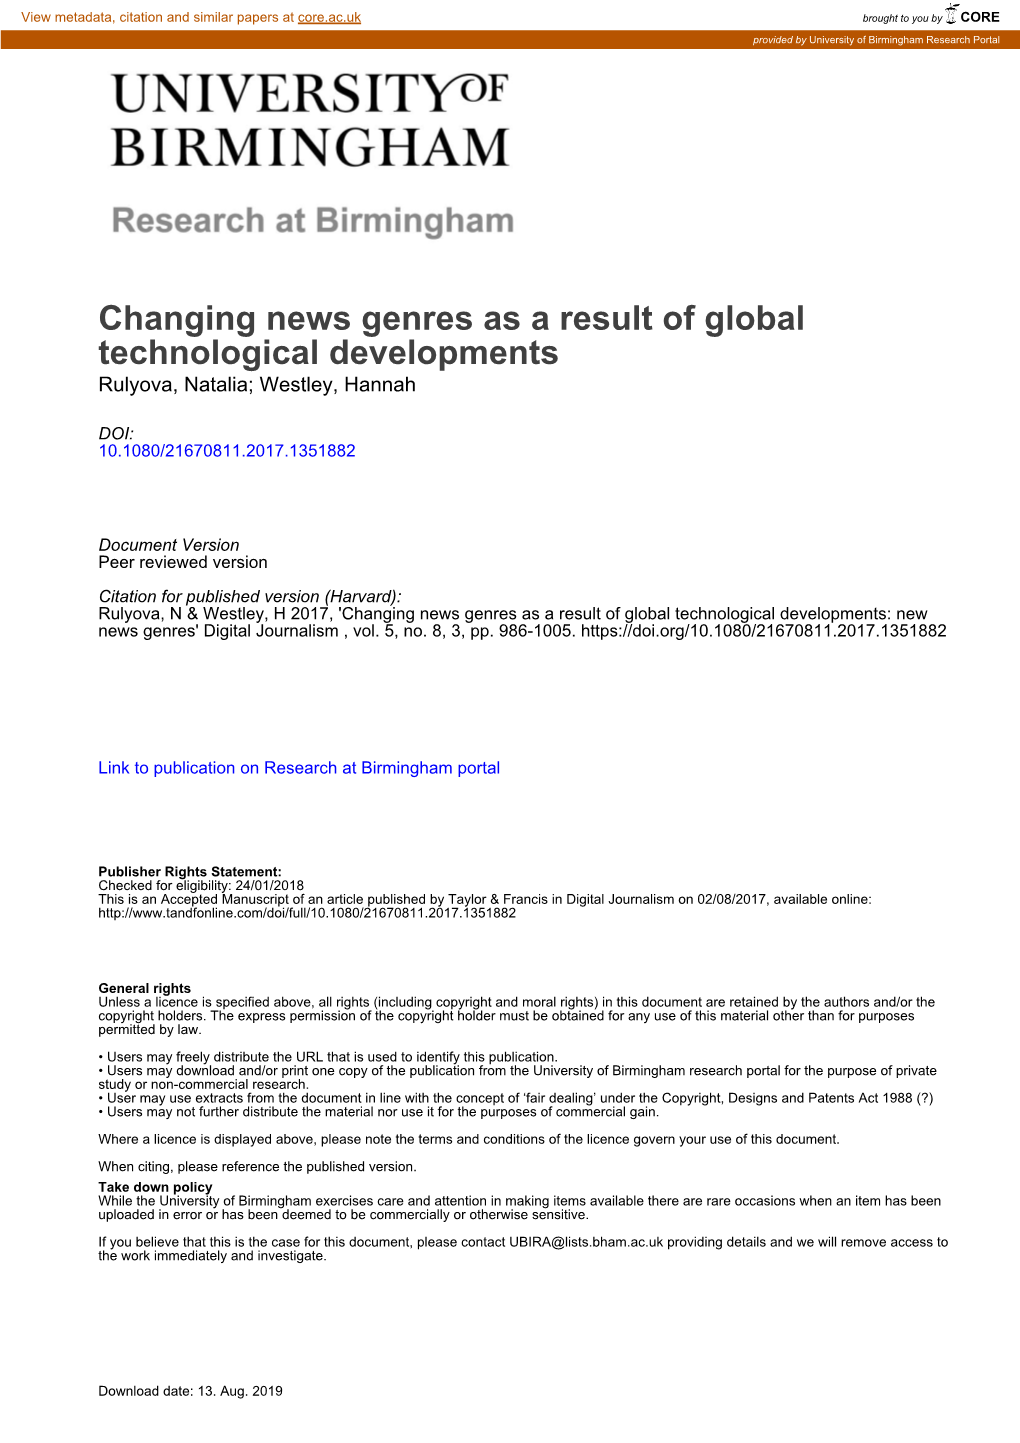 Changing News Genres As a Result of Global Technological Developments Rulyova, Natalia; Westley, Hannah